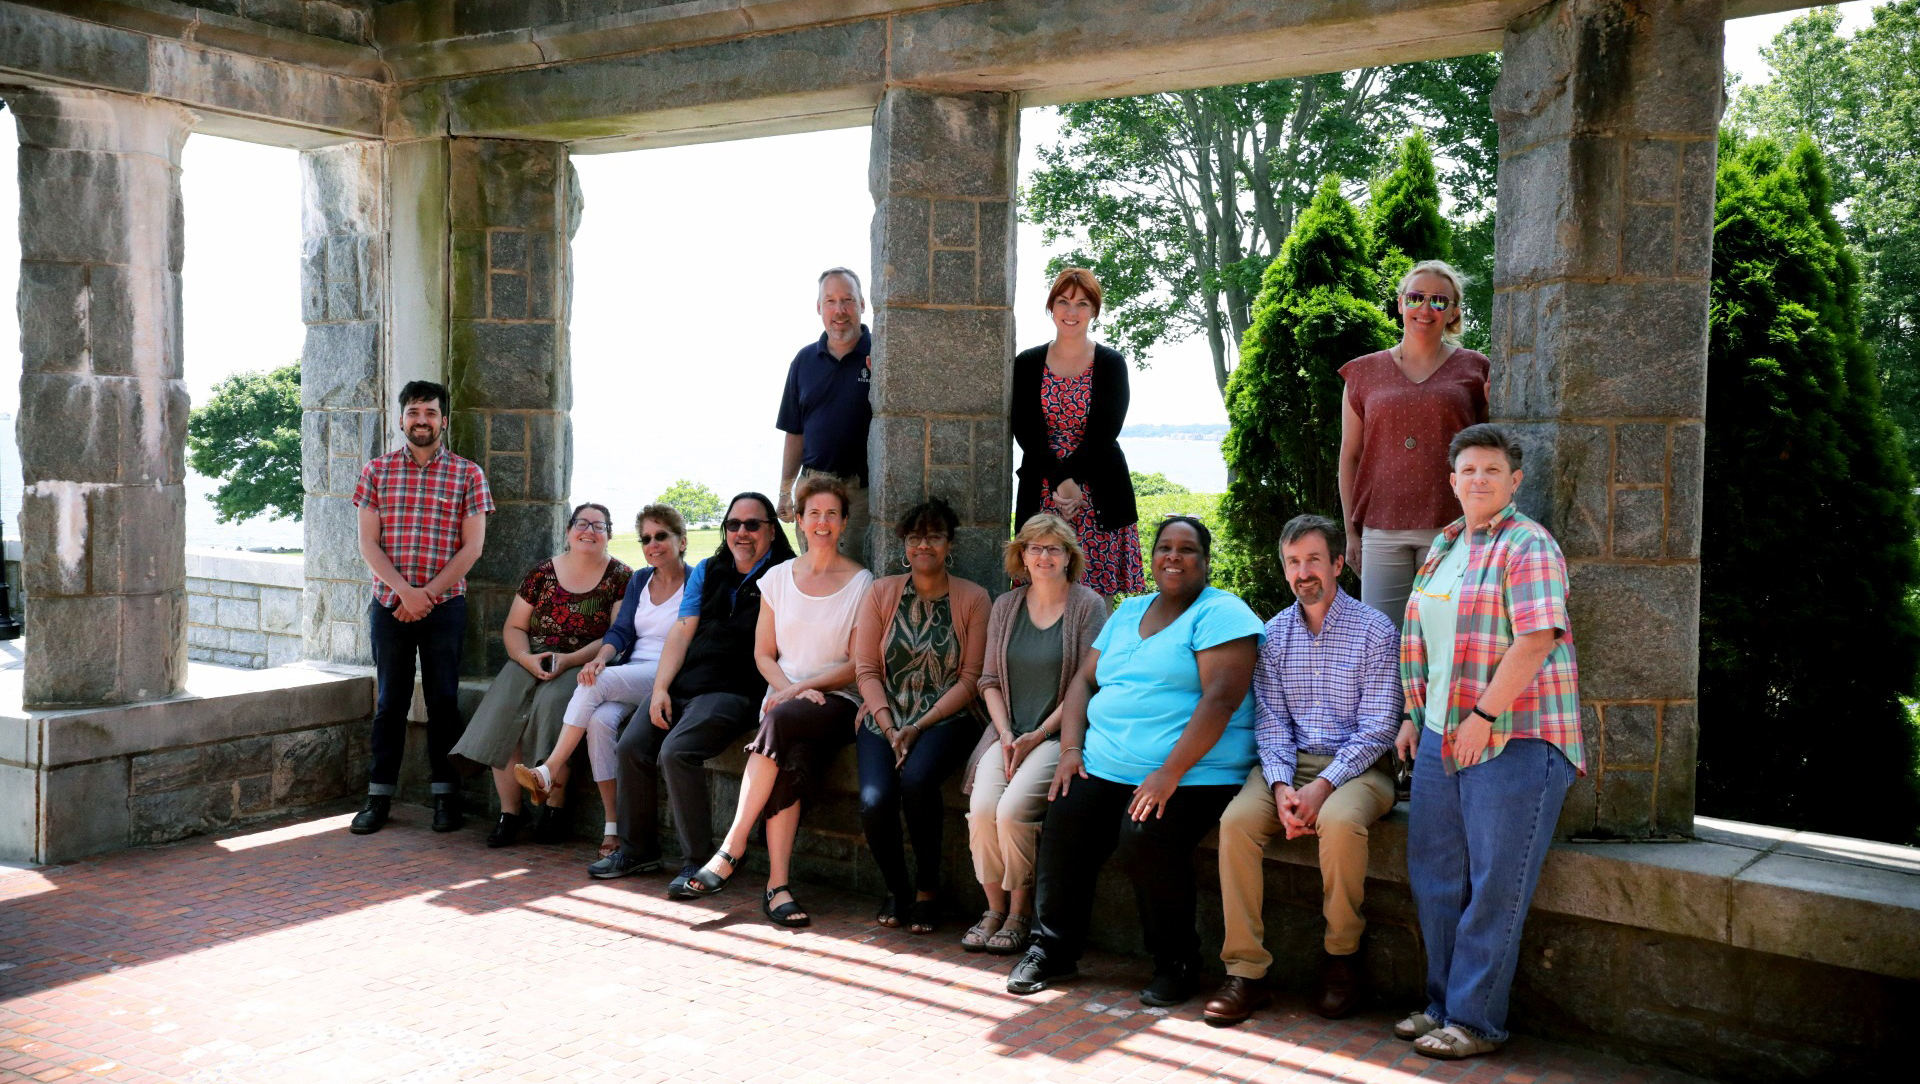 UConn Library Regional staff group photo at Avery Point Campus